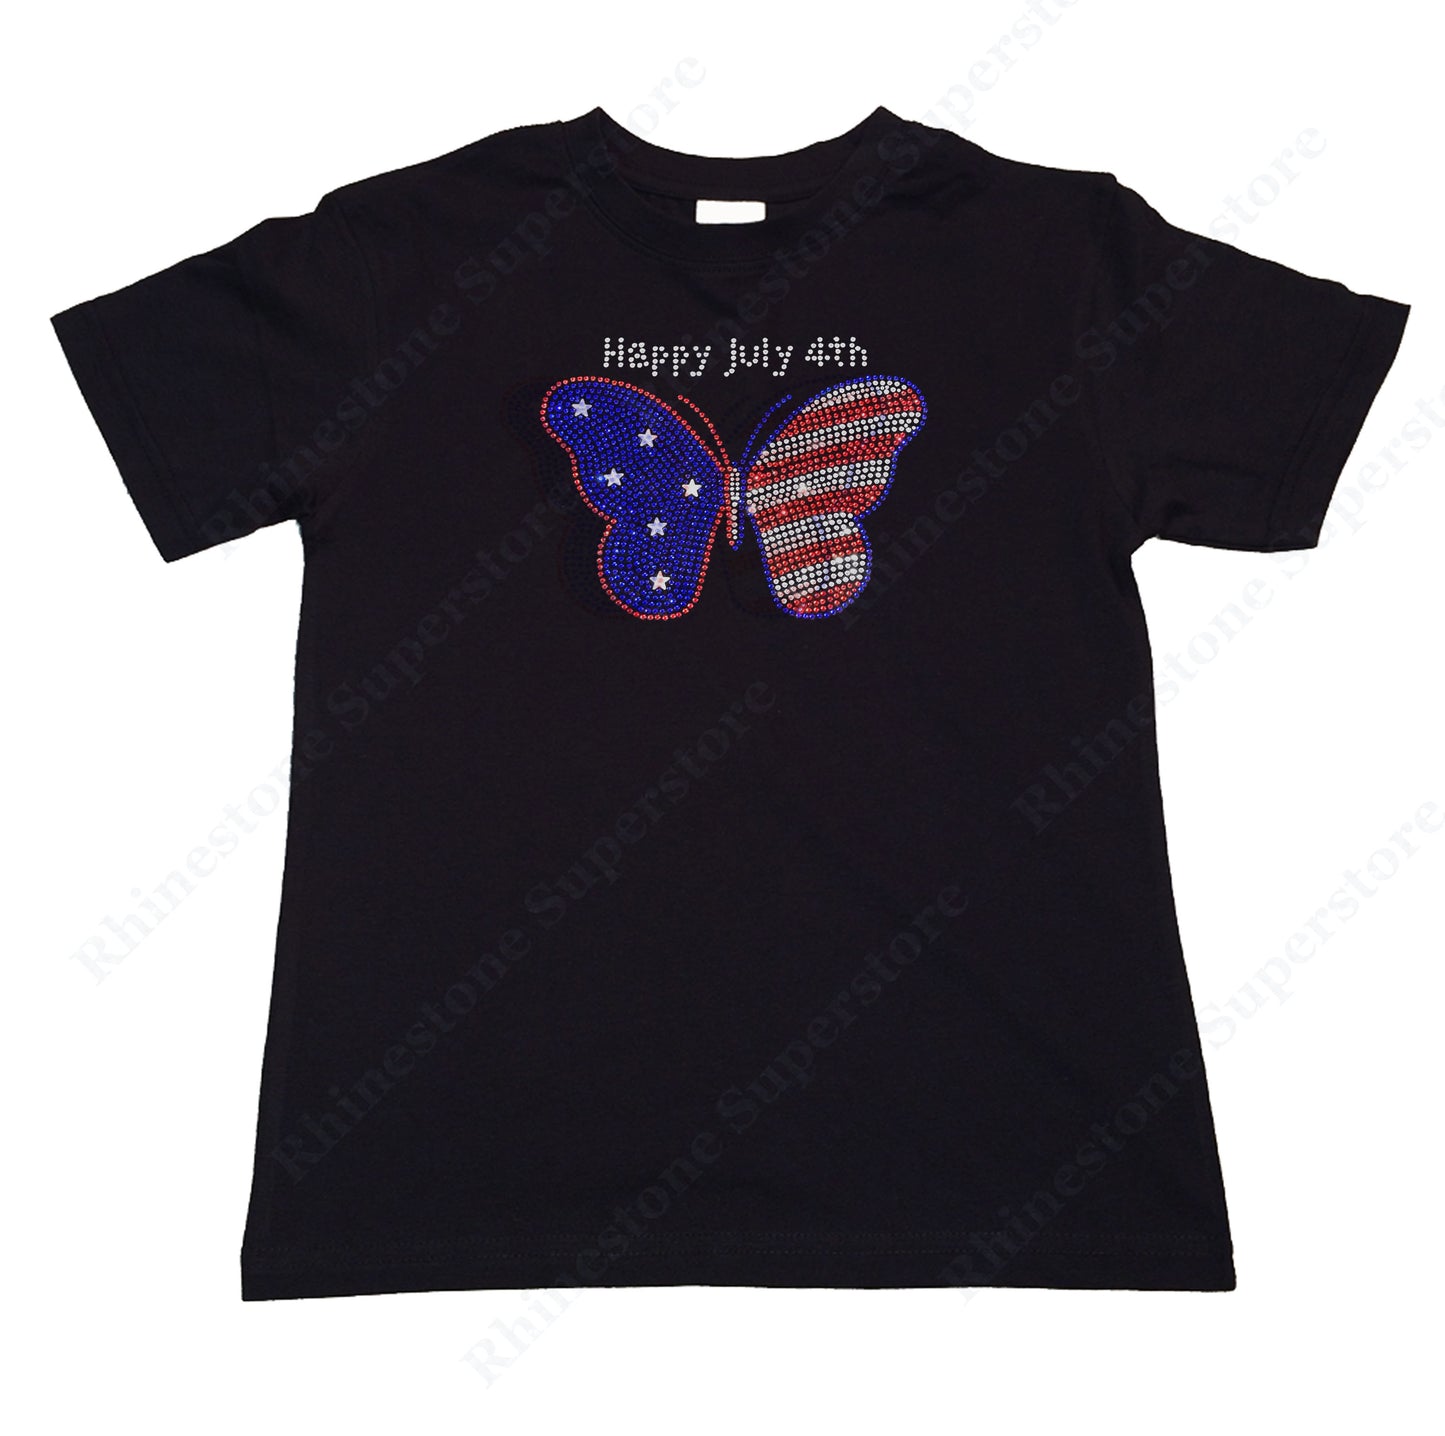 Girls Rhinestone T-Shirt " 4th of July Butterfly in Rhinestone " Kids Size 3 to 14 Available